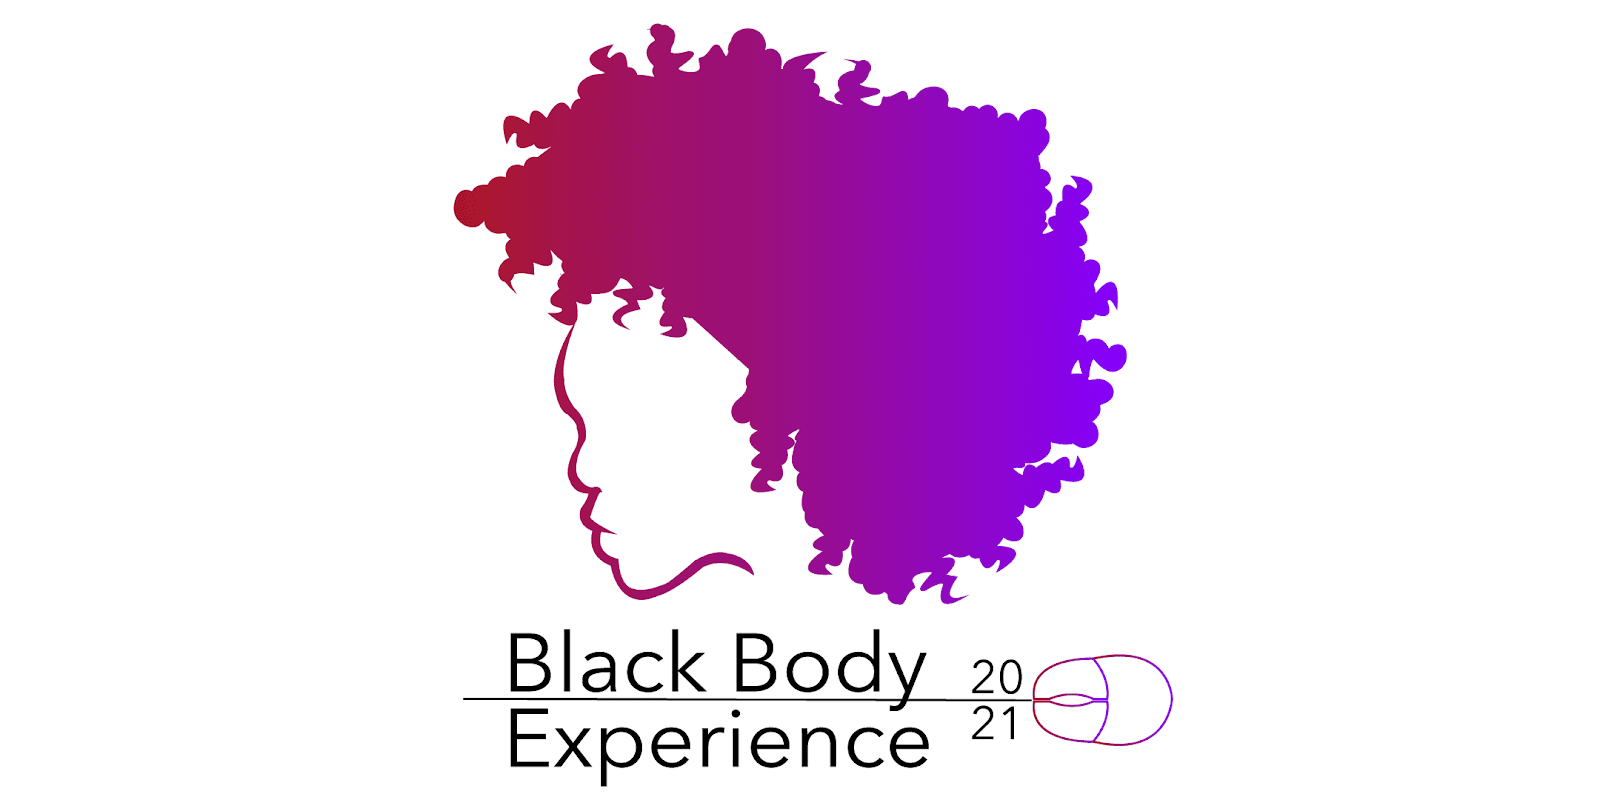 Visit https://www.eventbrite.com/e/the-black-body-experience-conference-power-in-the-pandemic-tickets-148844767707?aff=ebdssbe